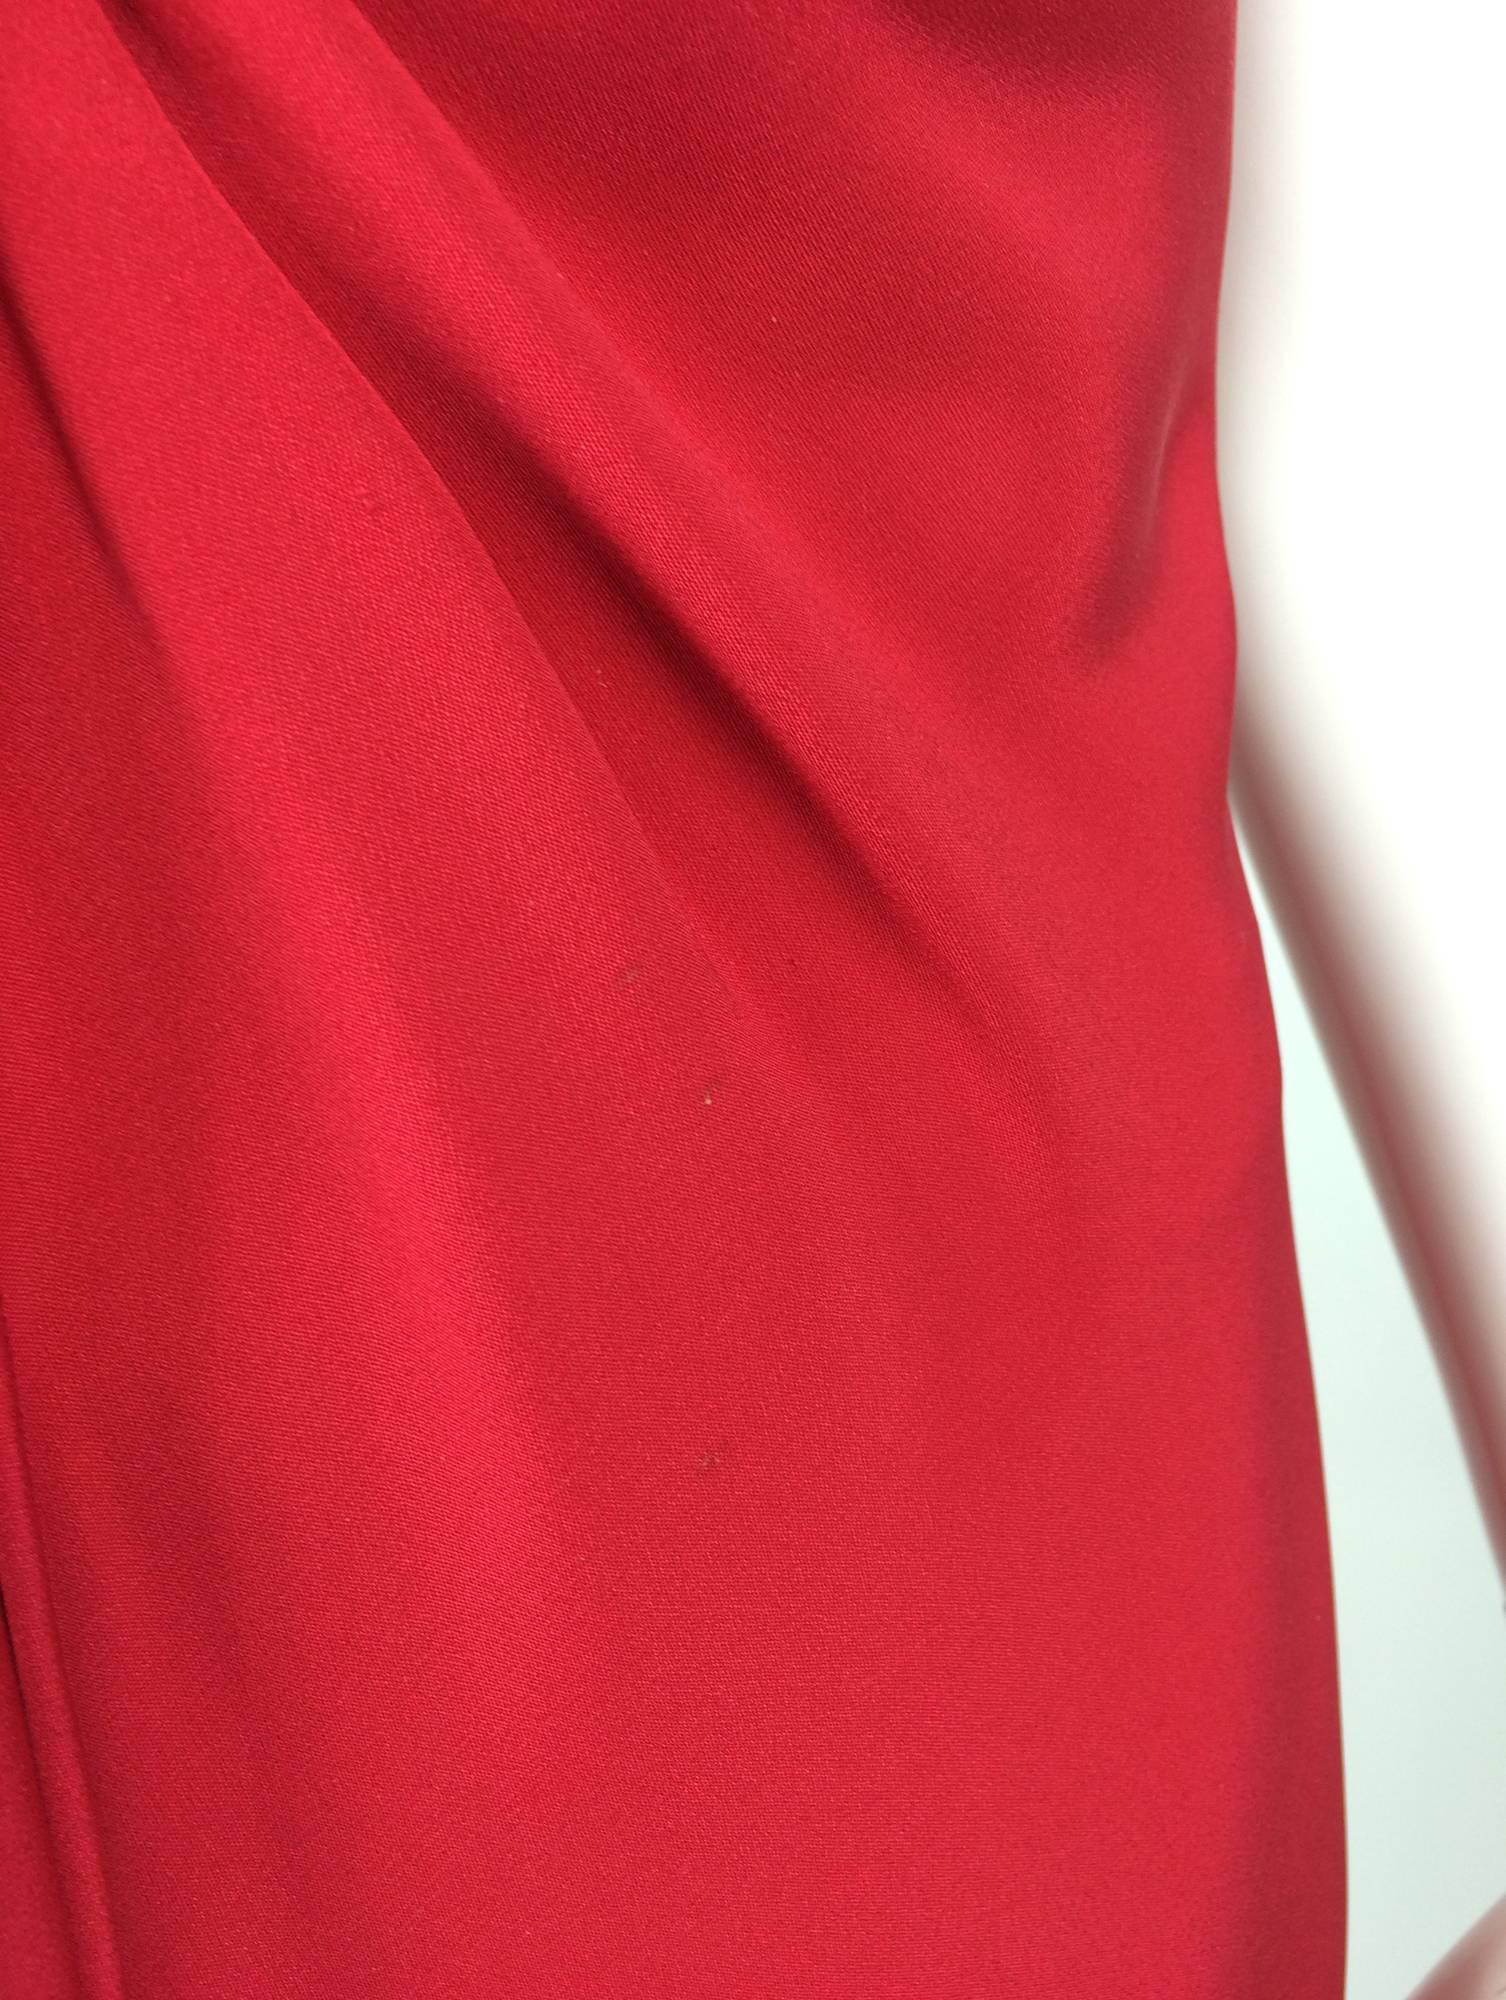 Fabulous John Anthony candy apple red silk strapless column gown with matching red silk chiffon stole 1980s...Shaped bodice is gathered at the center and drapes to the hem...The dress has a low open back and falls to the hem with a flair...Fully